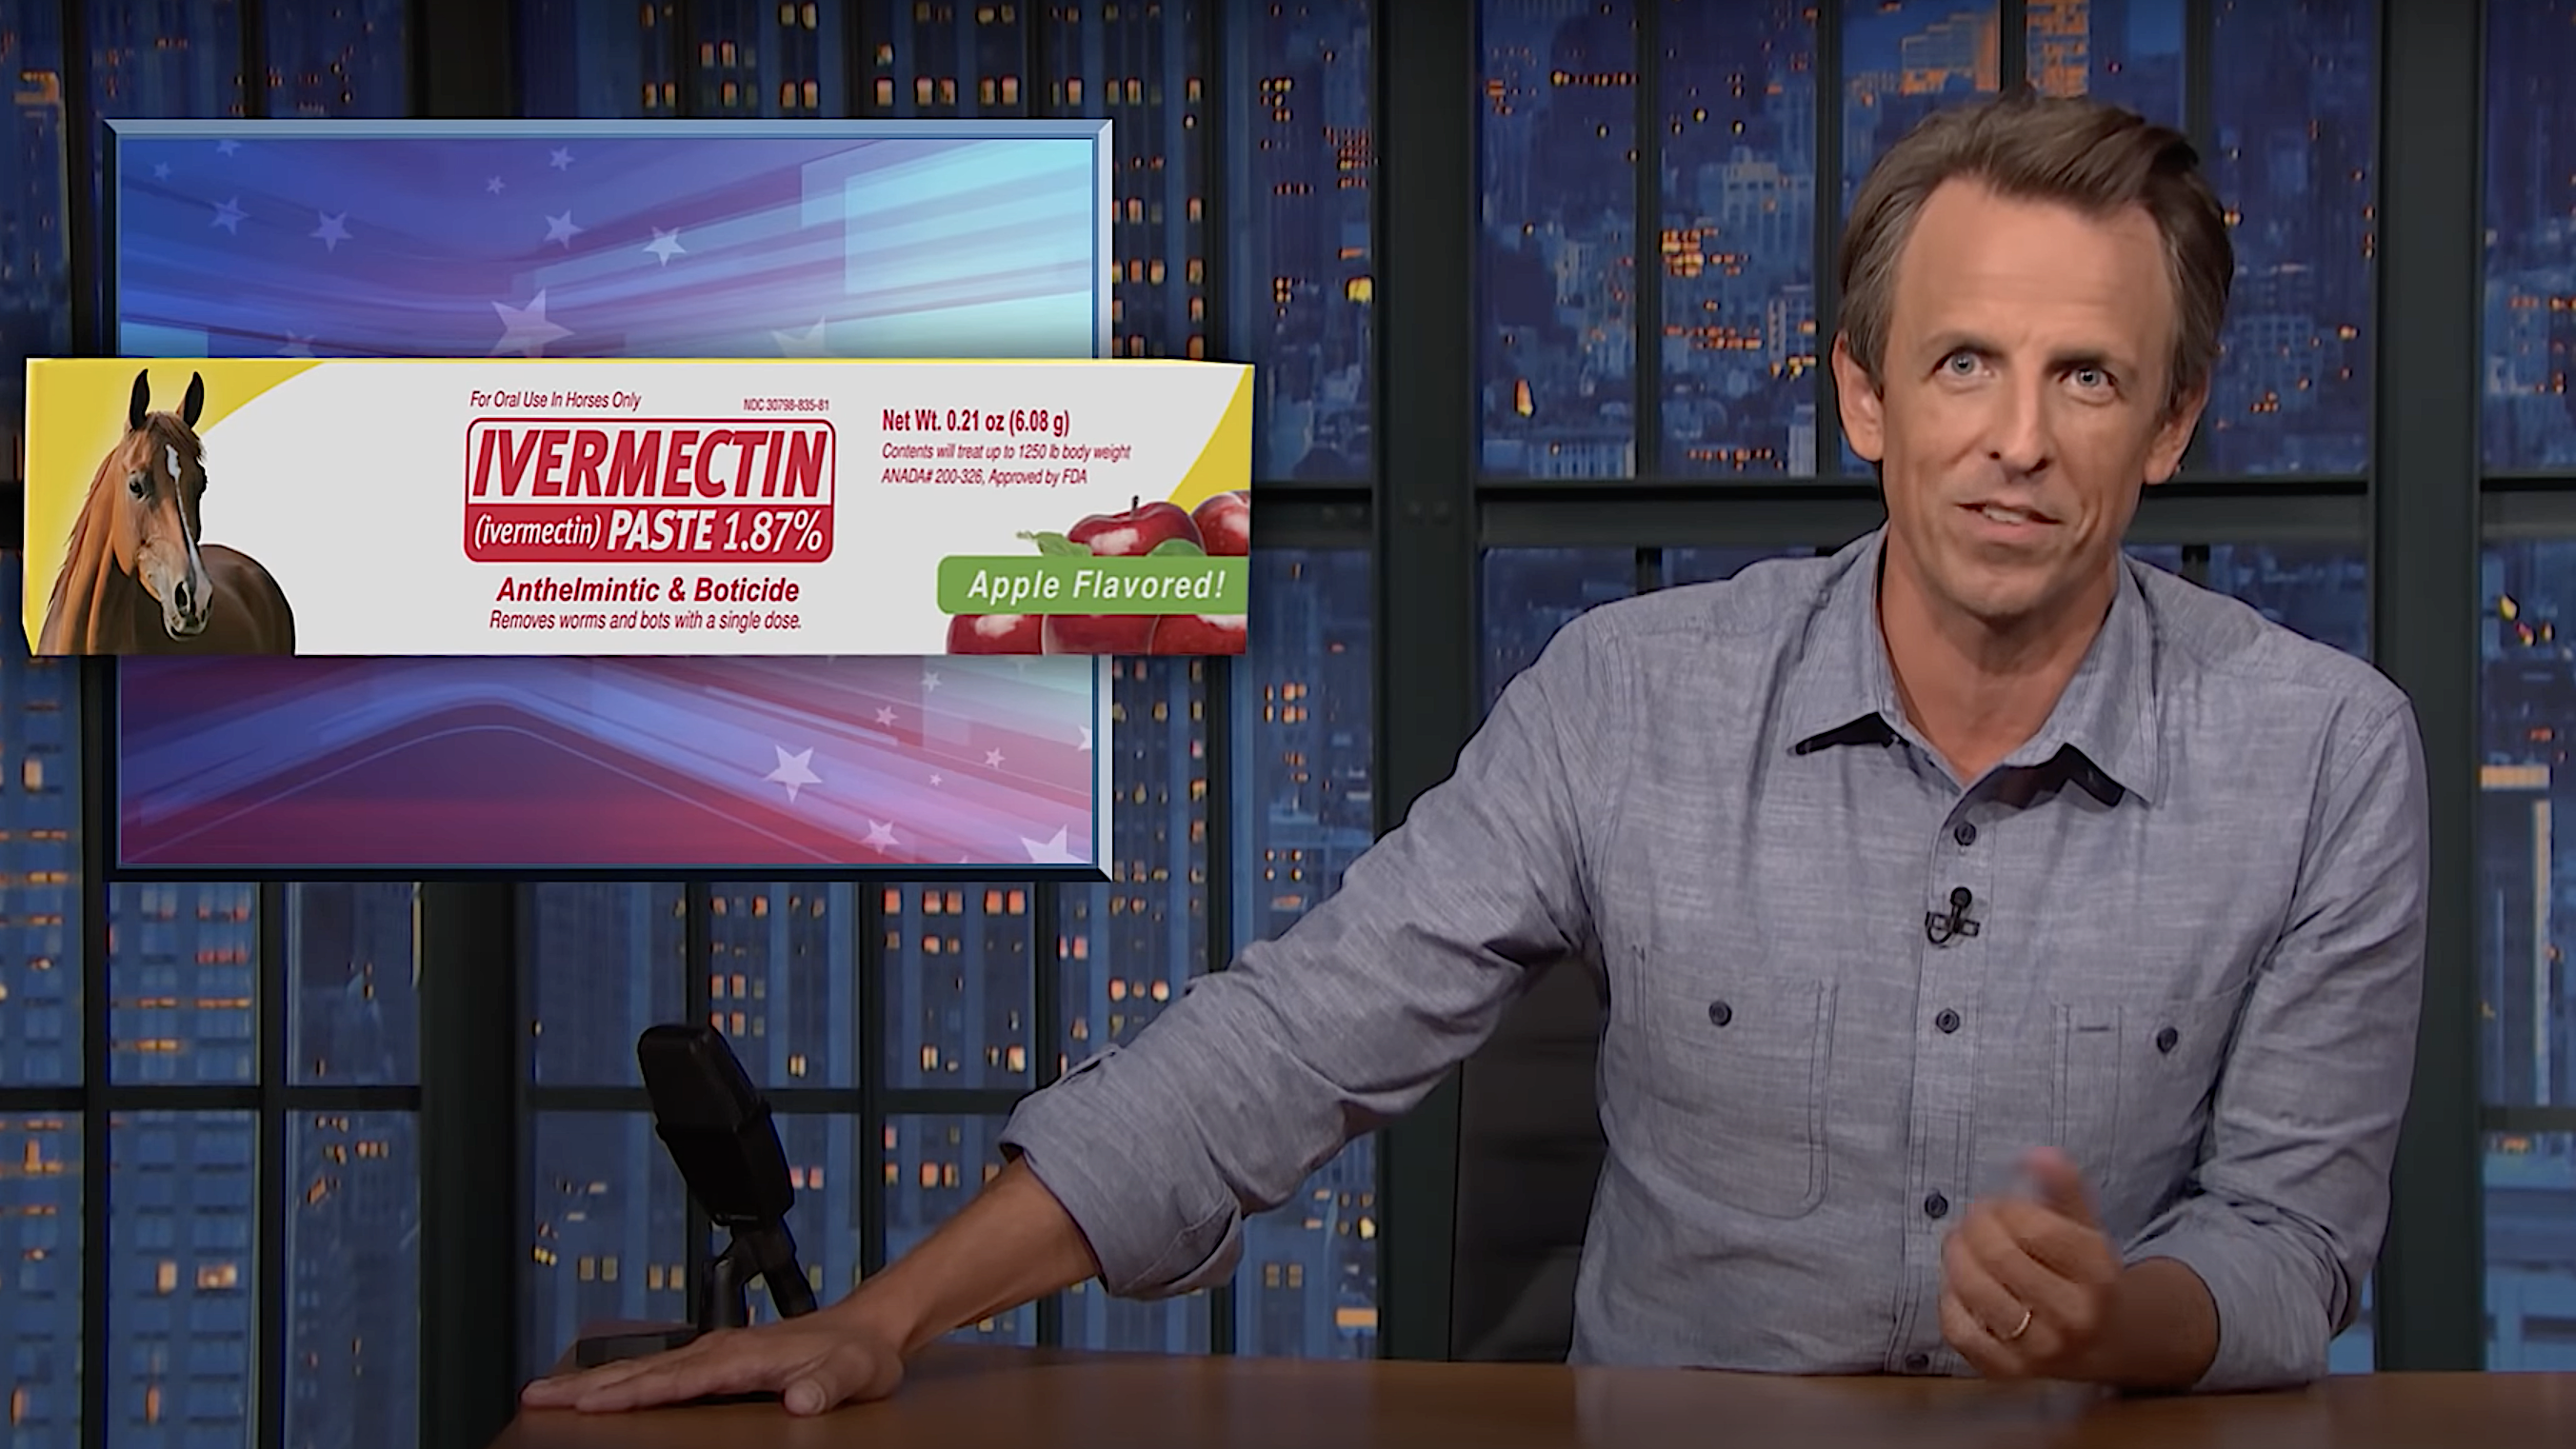 Seth Meyers begs viewers not to eat horsey medicine, since that’s where we’re at now